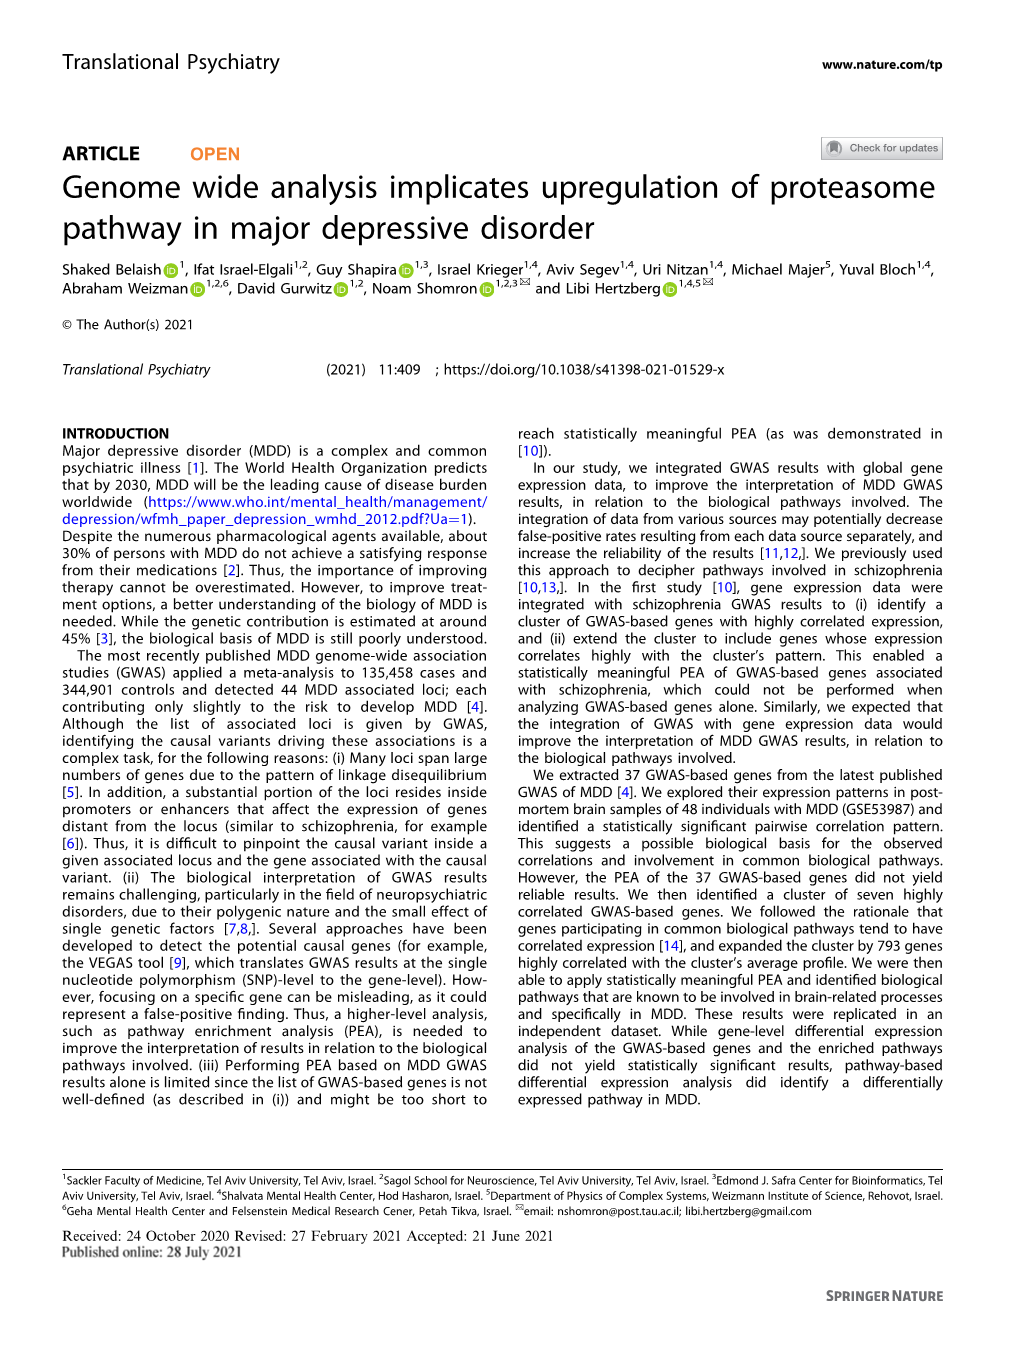 Genome Wide Analysis Implicates Upregulation of Proteasome Pathway in Major Depressive Disorder